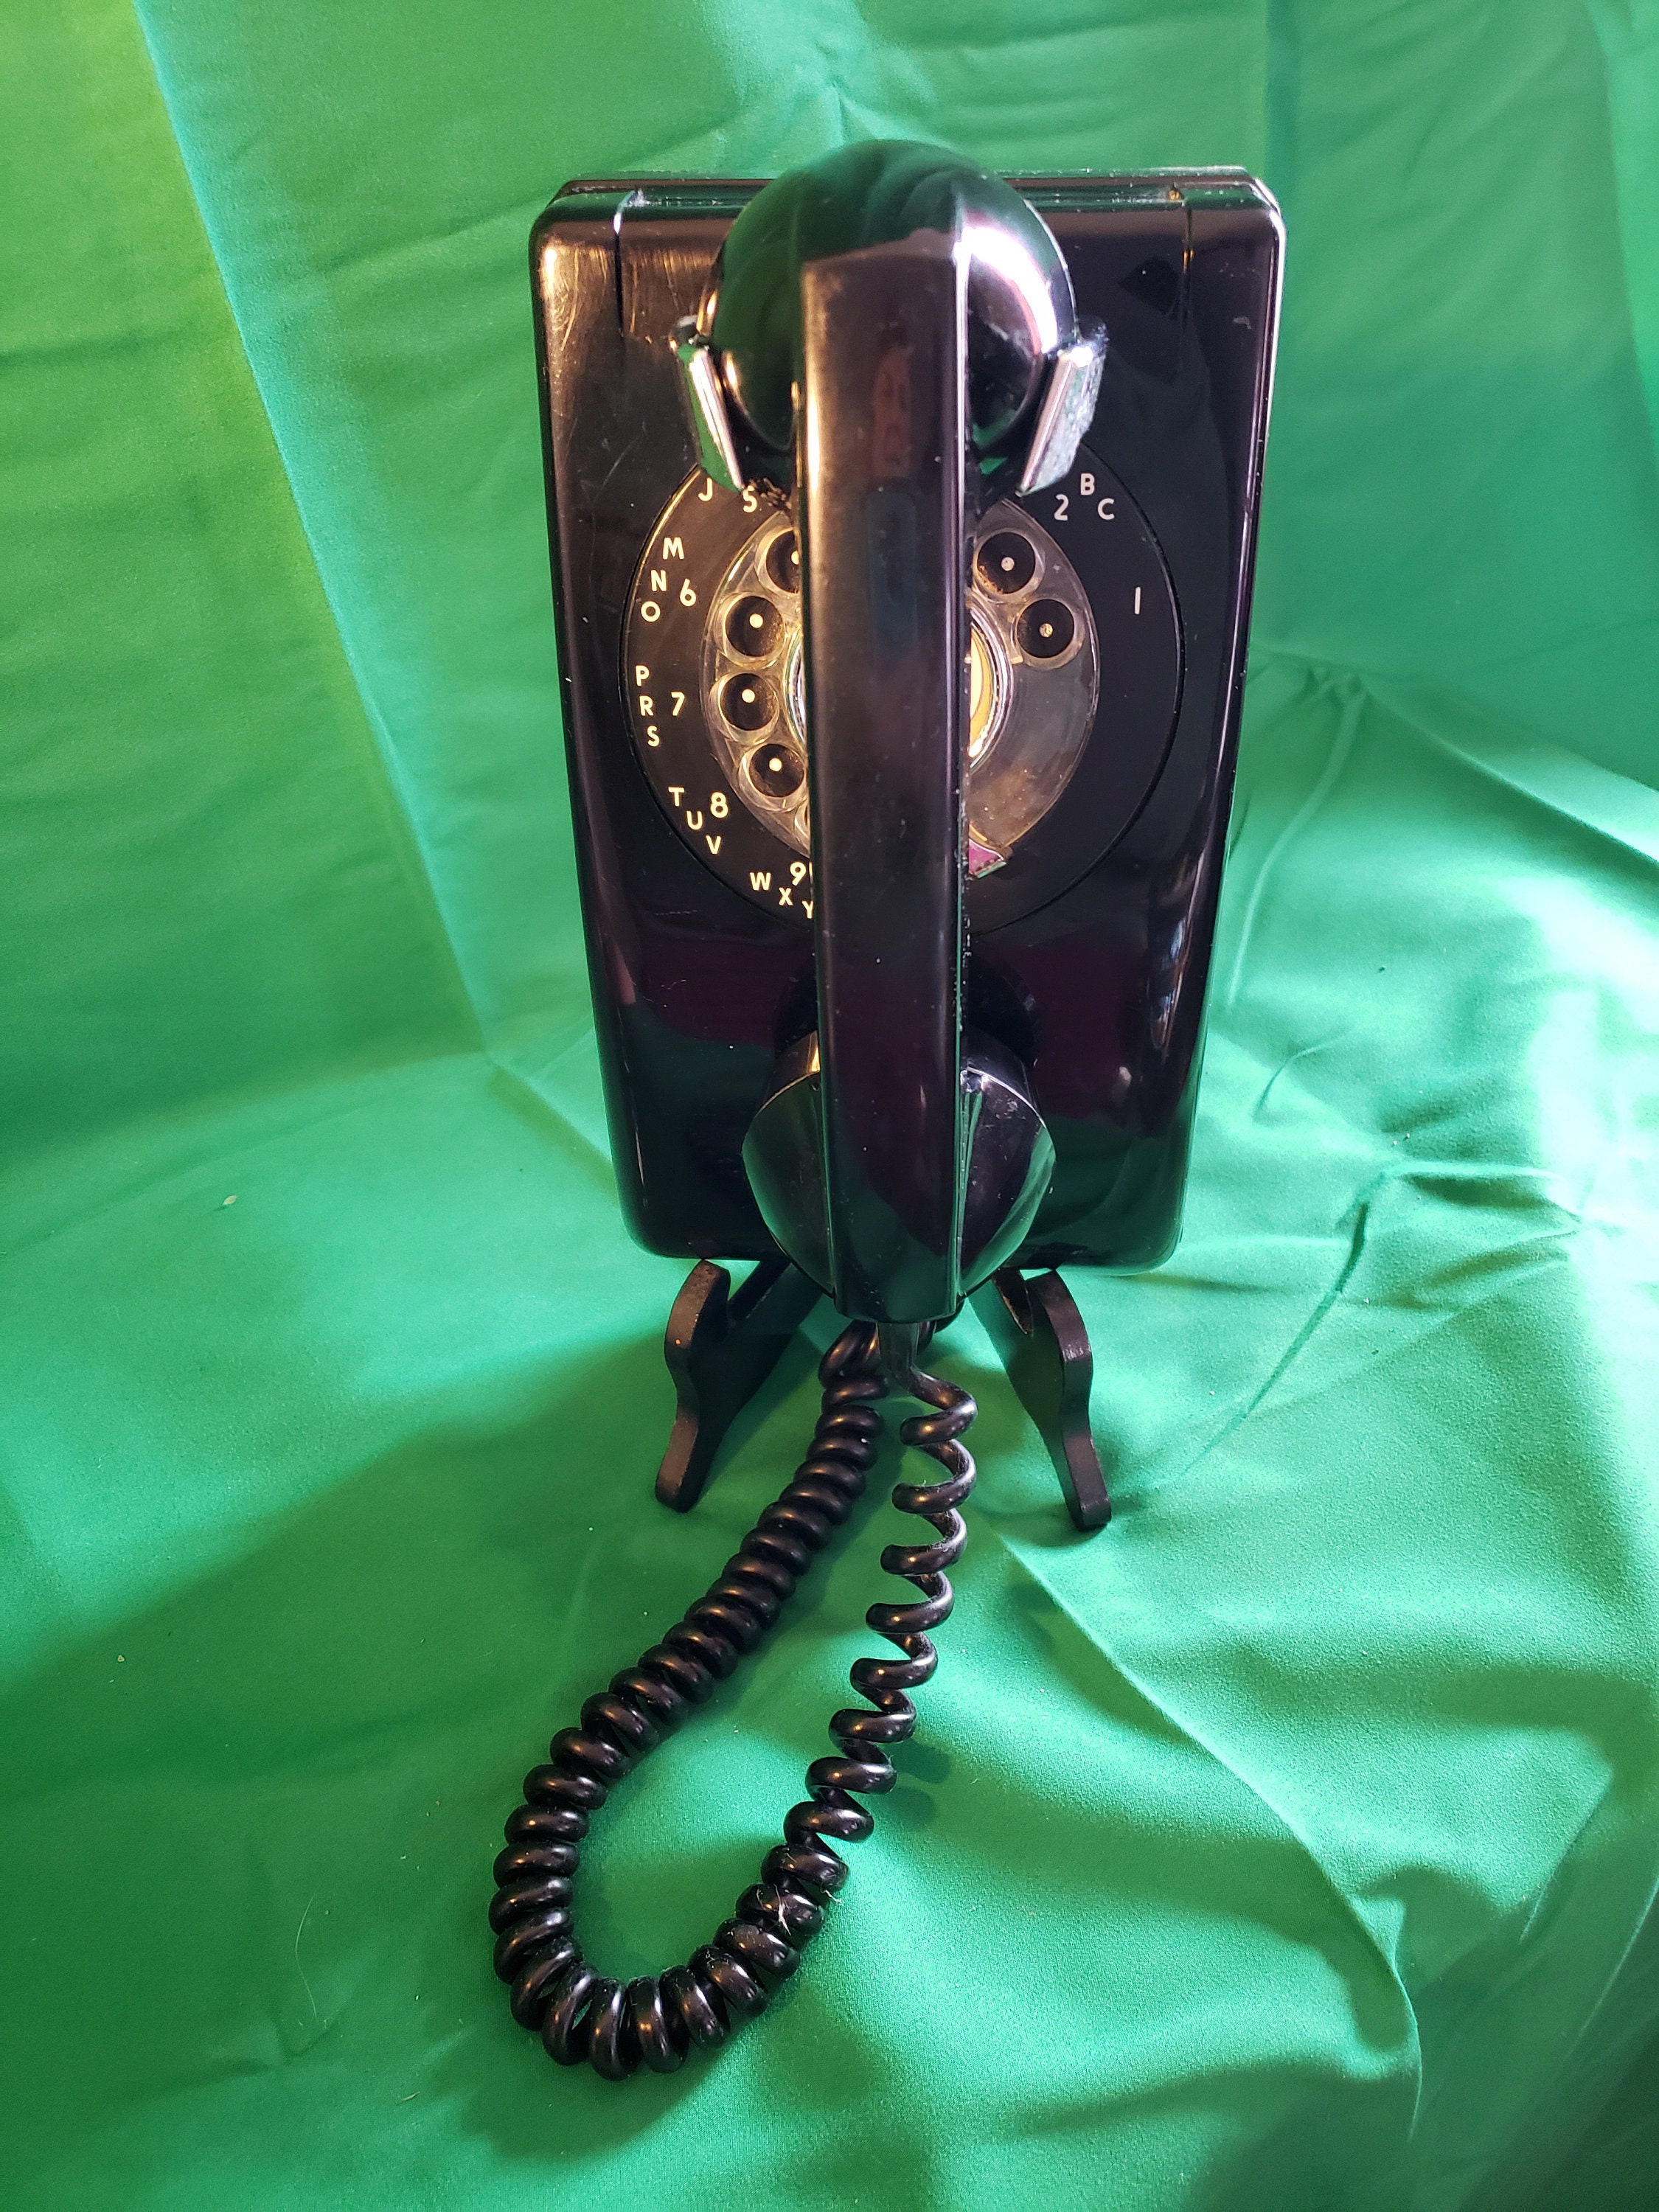 Telephone Company  Lineman's Test phone Co. Old by A E Vintage 